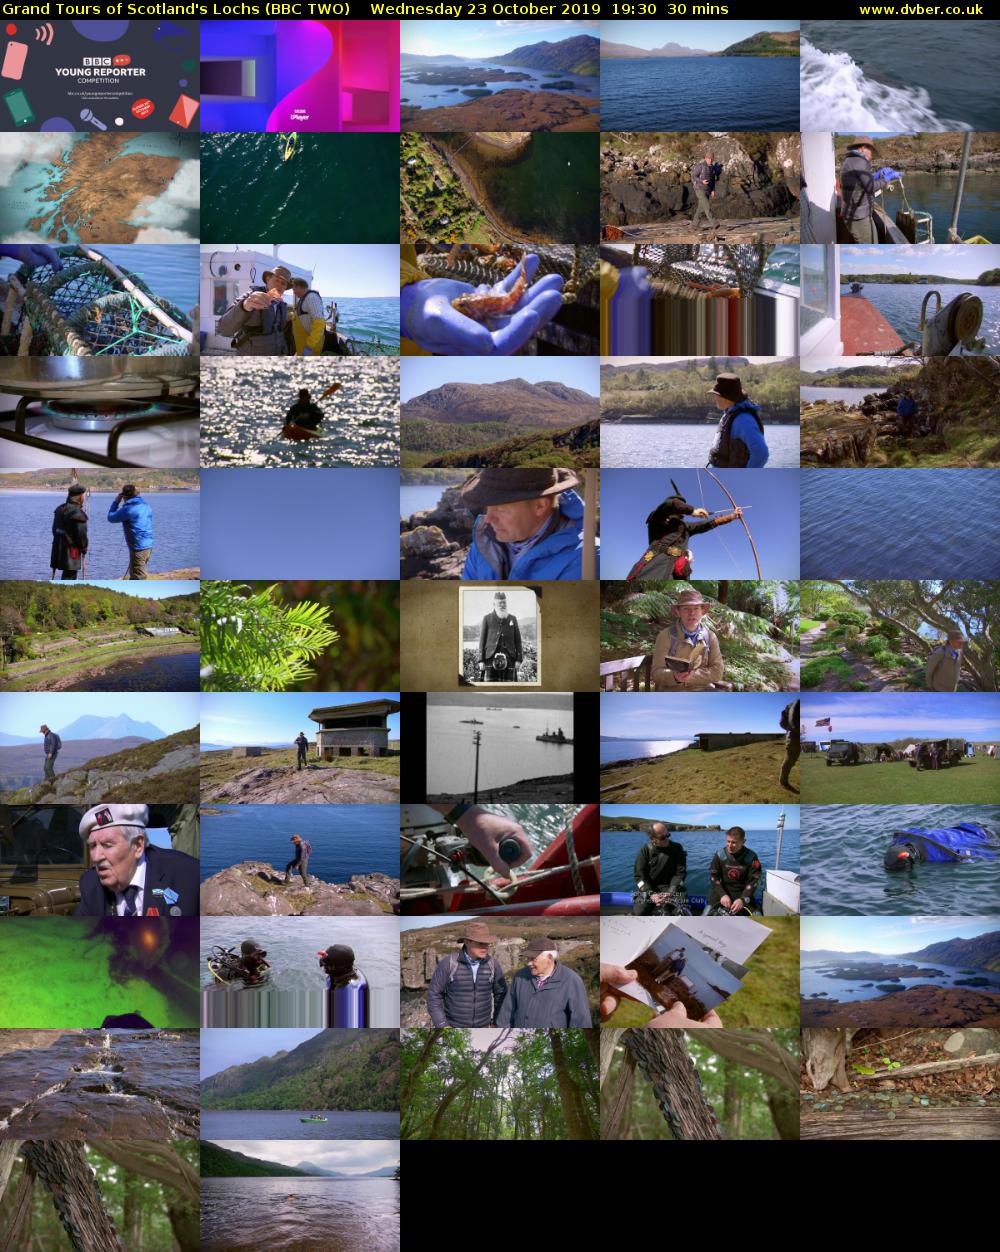 Grand Tours of Scotland's Lochs (BBC TWO) Wednesday 23 October 2019 19:30 - 20:00